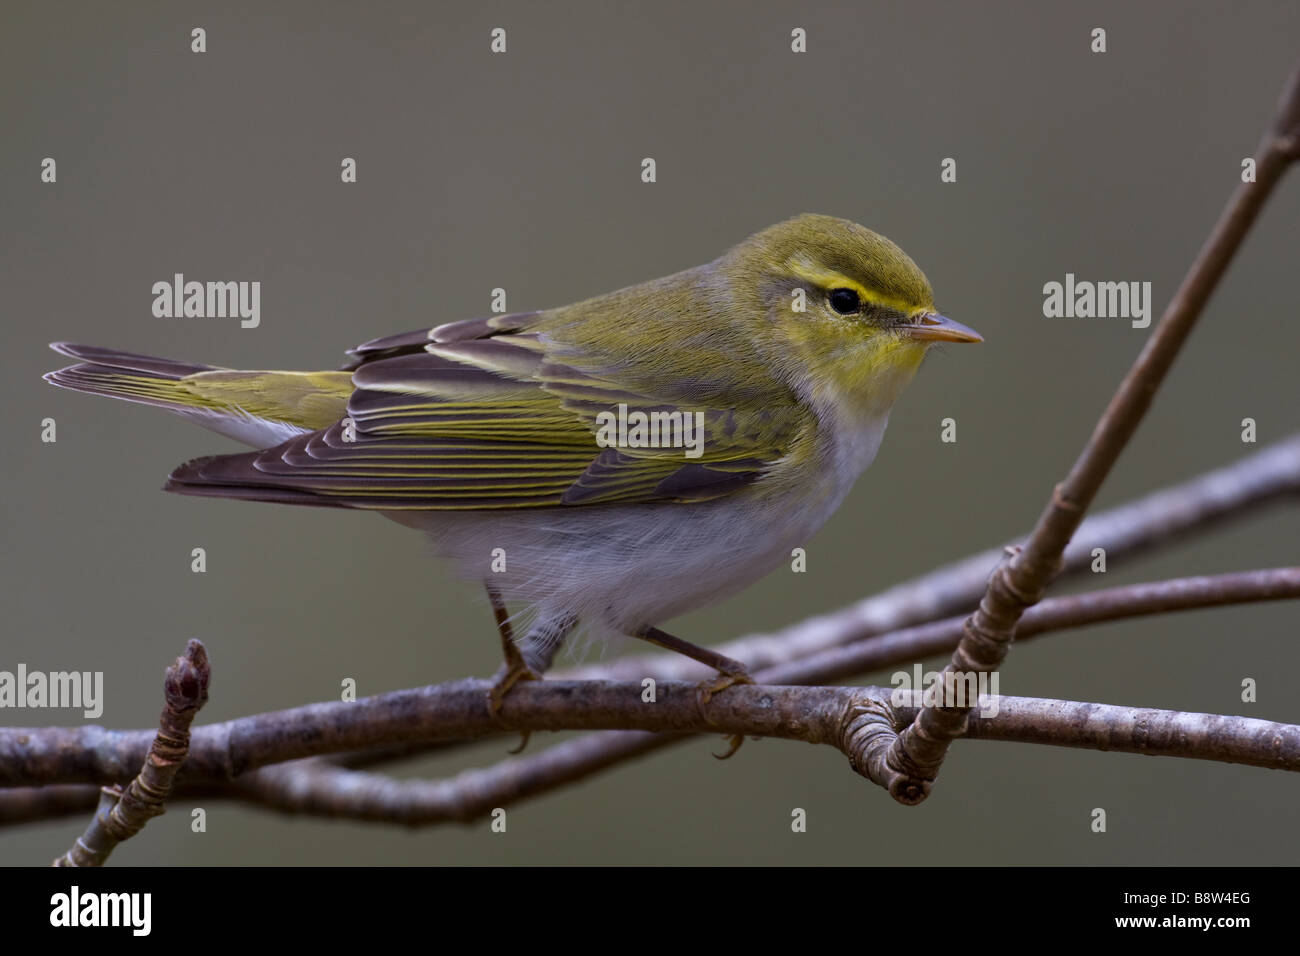 Wood Warbler, Phylloscopus sibilatrix, perched on branch in early spring Stock Photo